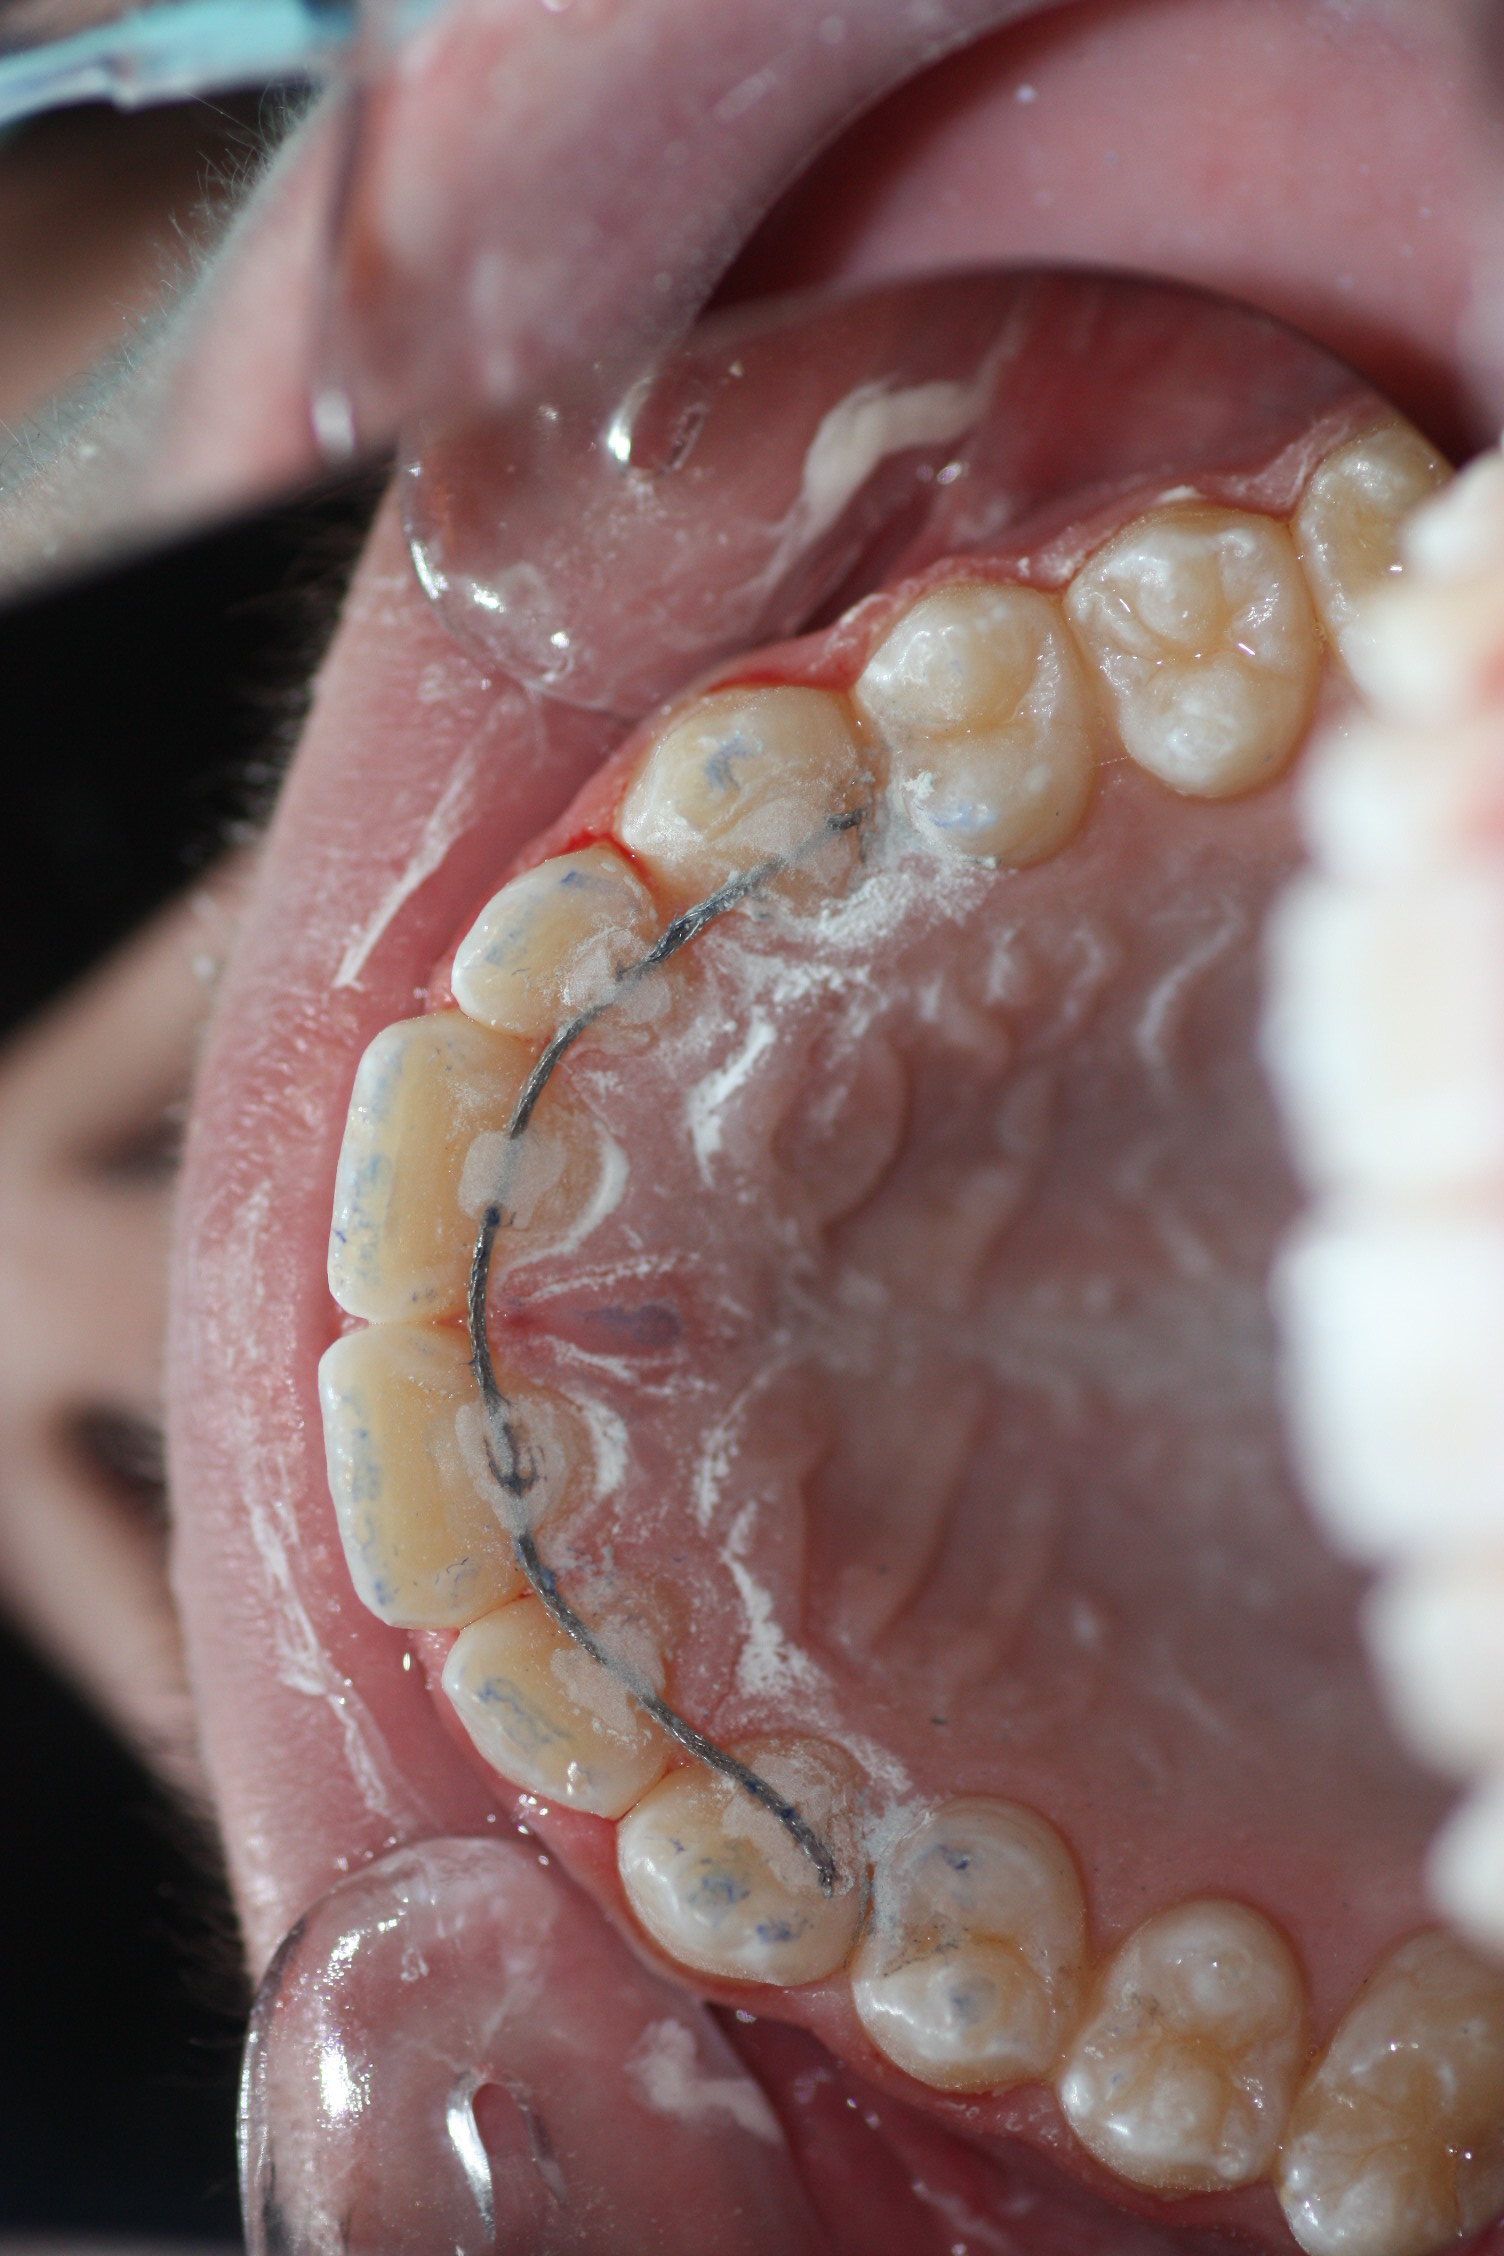 It is important to make an occlusal adjustment so that the patient can bite with nromality despite retention.